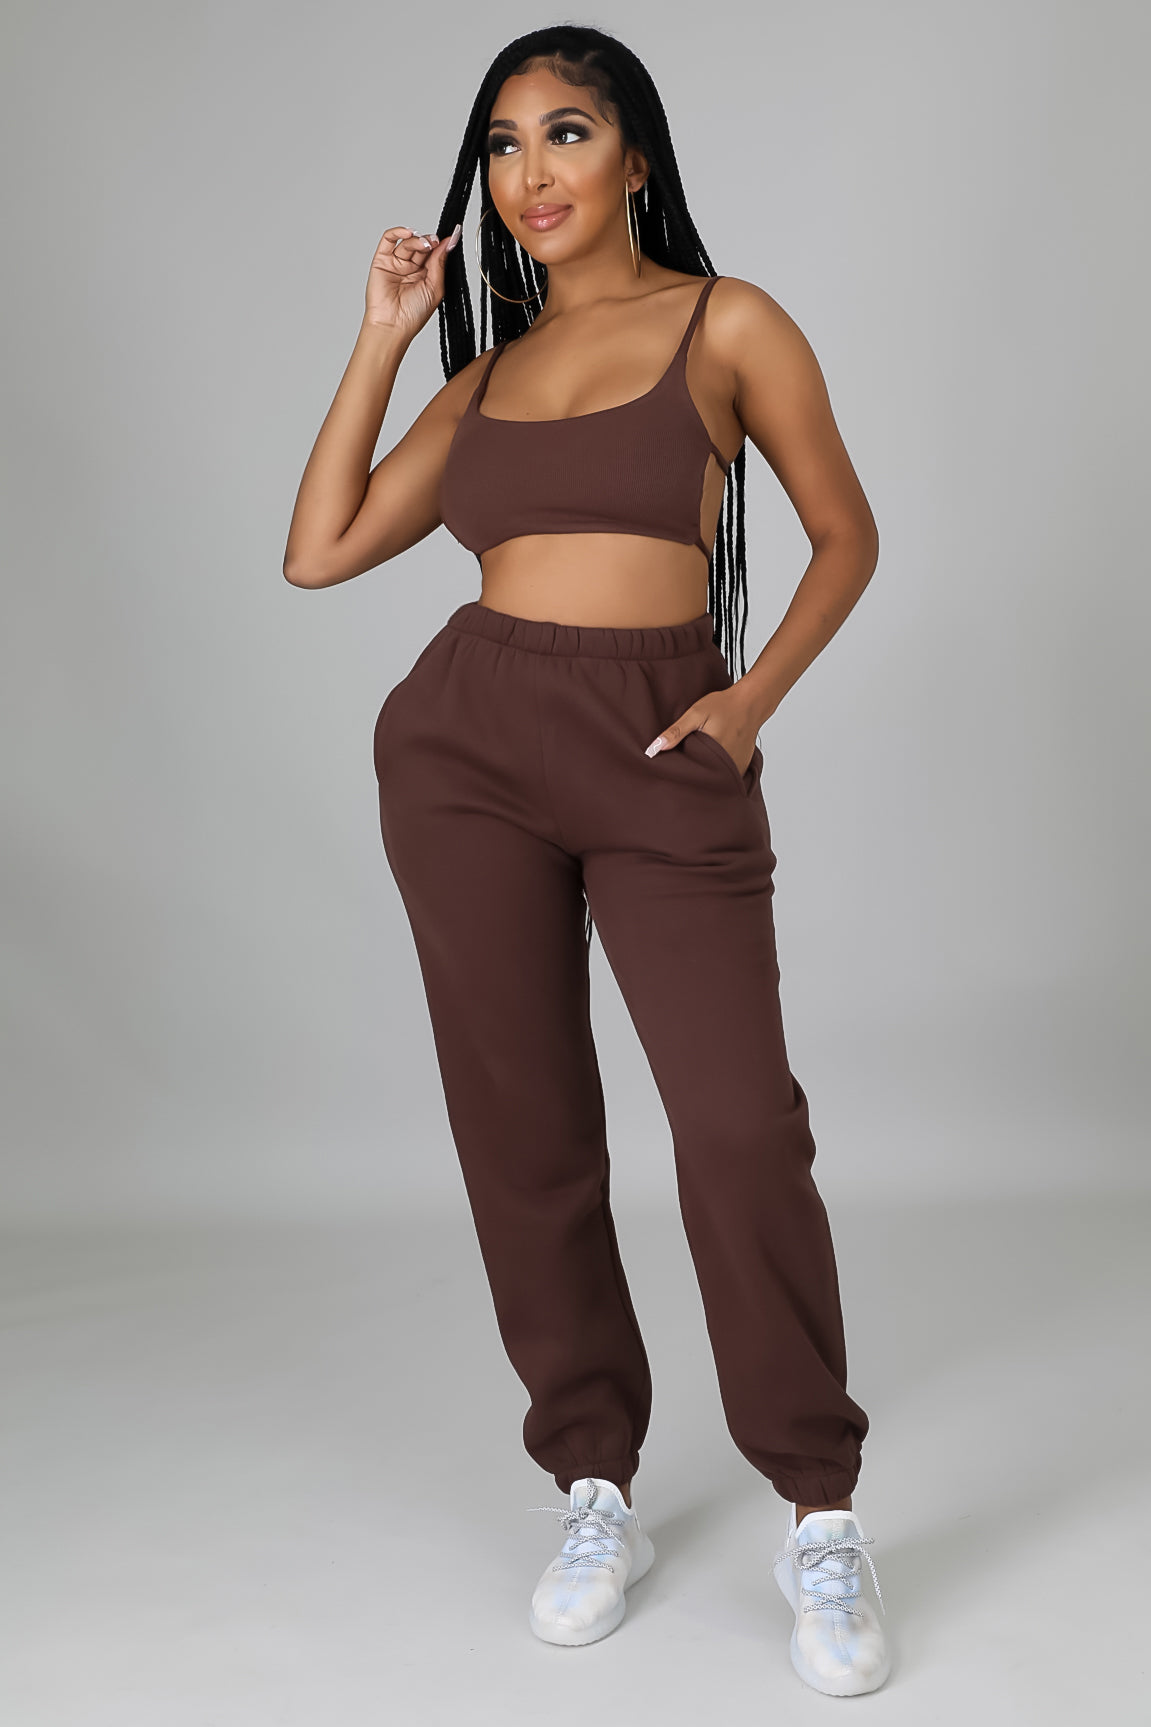 Late Night Convos Pant Set